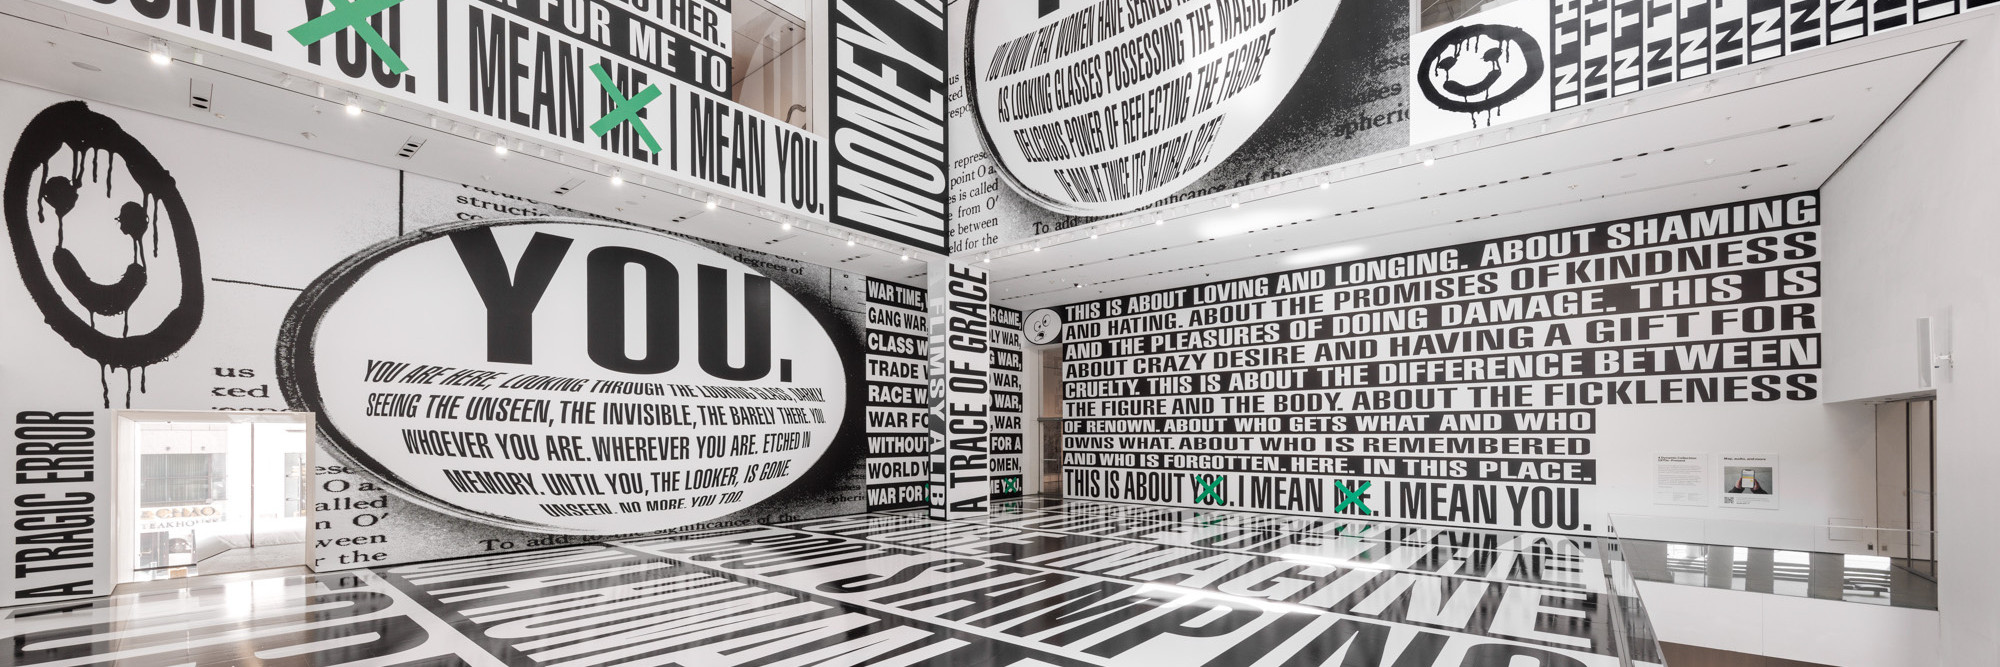 Installation view of Barbara Kruger: Thinking of You. I Mean Me. I Mean You, on view at The Museum of Modern Art, New York from July 16, 2022 – January 2, 2023. Photo: Emile Askey